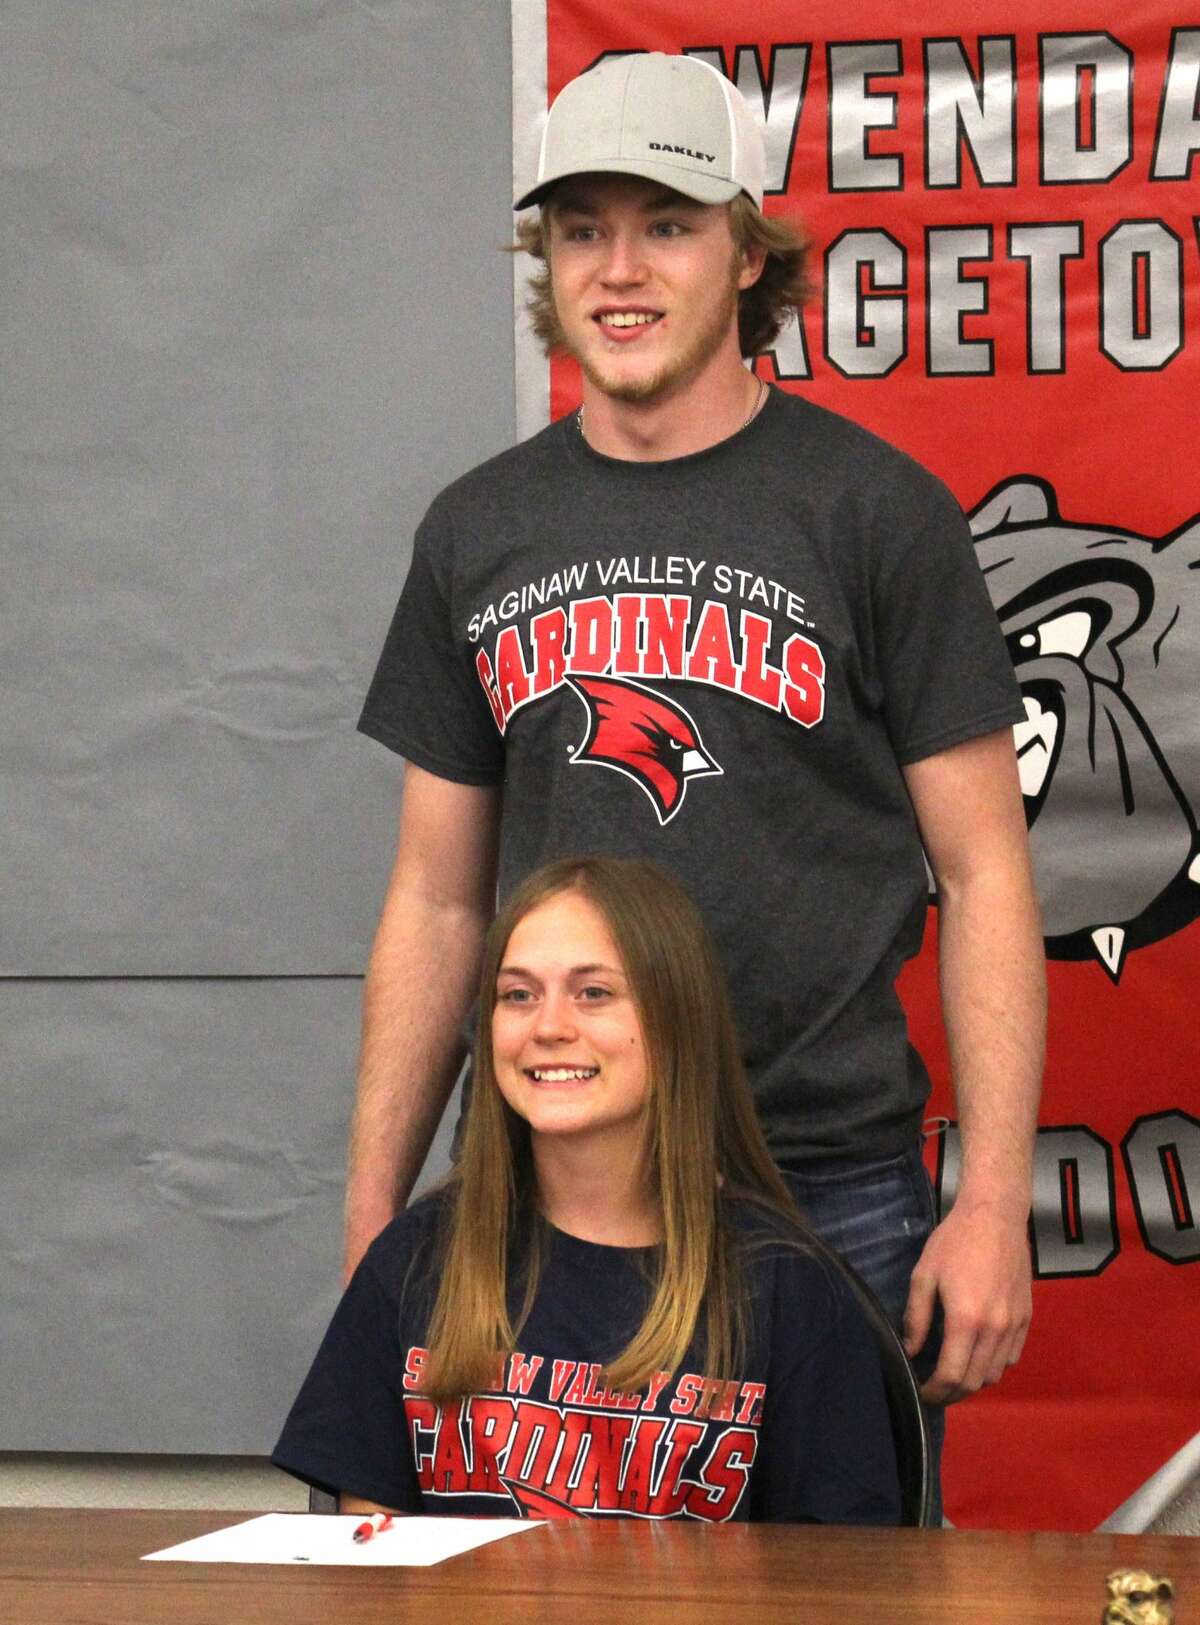 Owendale-Gagetown senior Libby Ondrajka signed a letter of intent on Friday afternoon to attend and run track and cross country at Saginaw Valley State Univeristy.